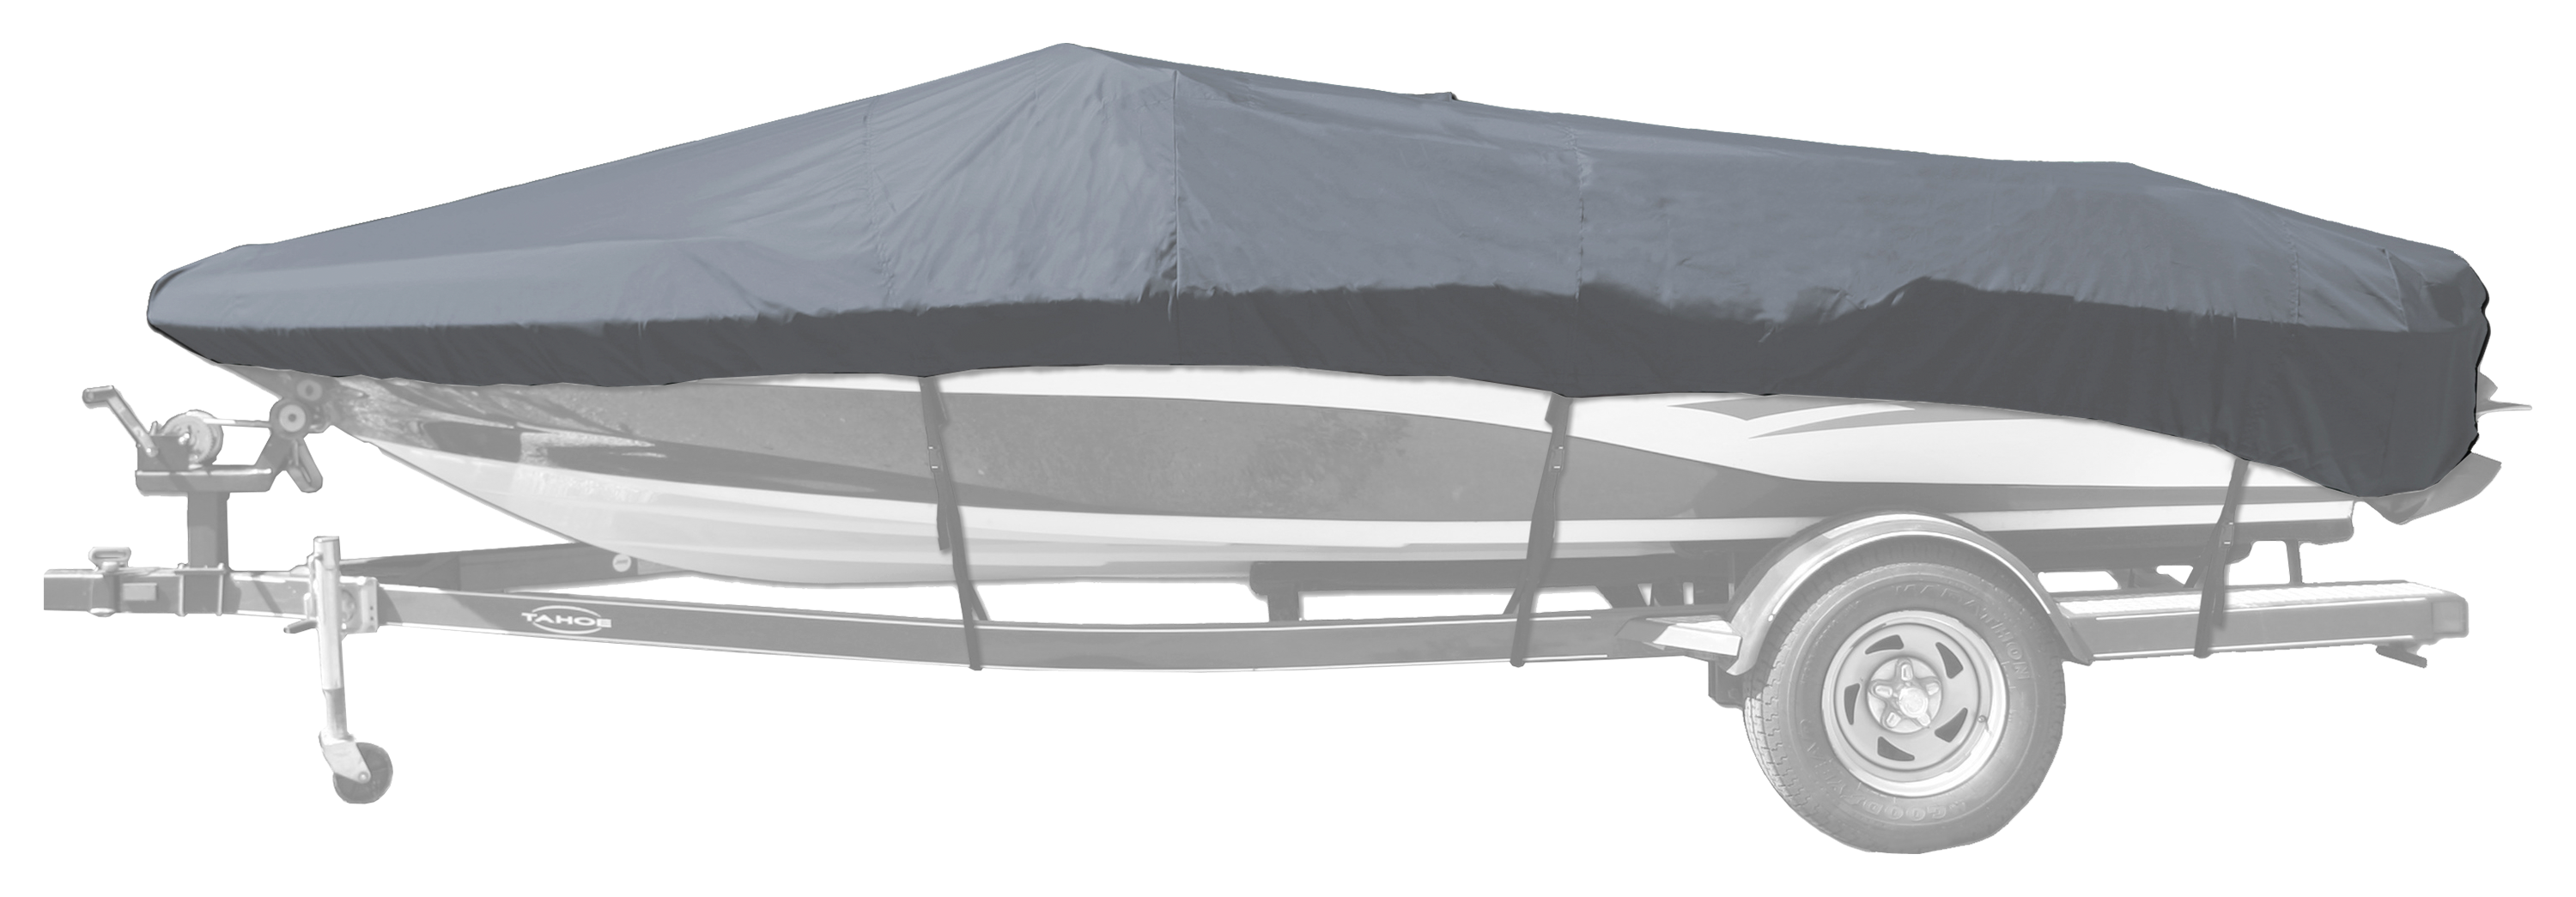 Bass Pro Shops Select Fit Hurricane Boat Cover by Westland for Euro V-Hull Runabout I/O Model - Gray - 17'6'' to 18'5